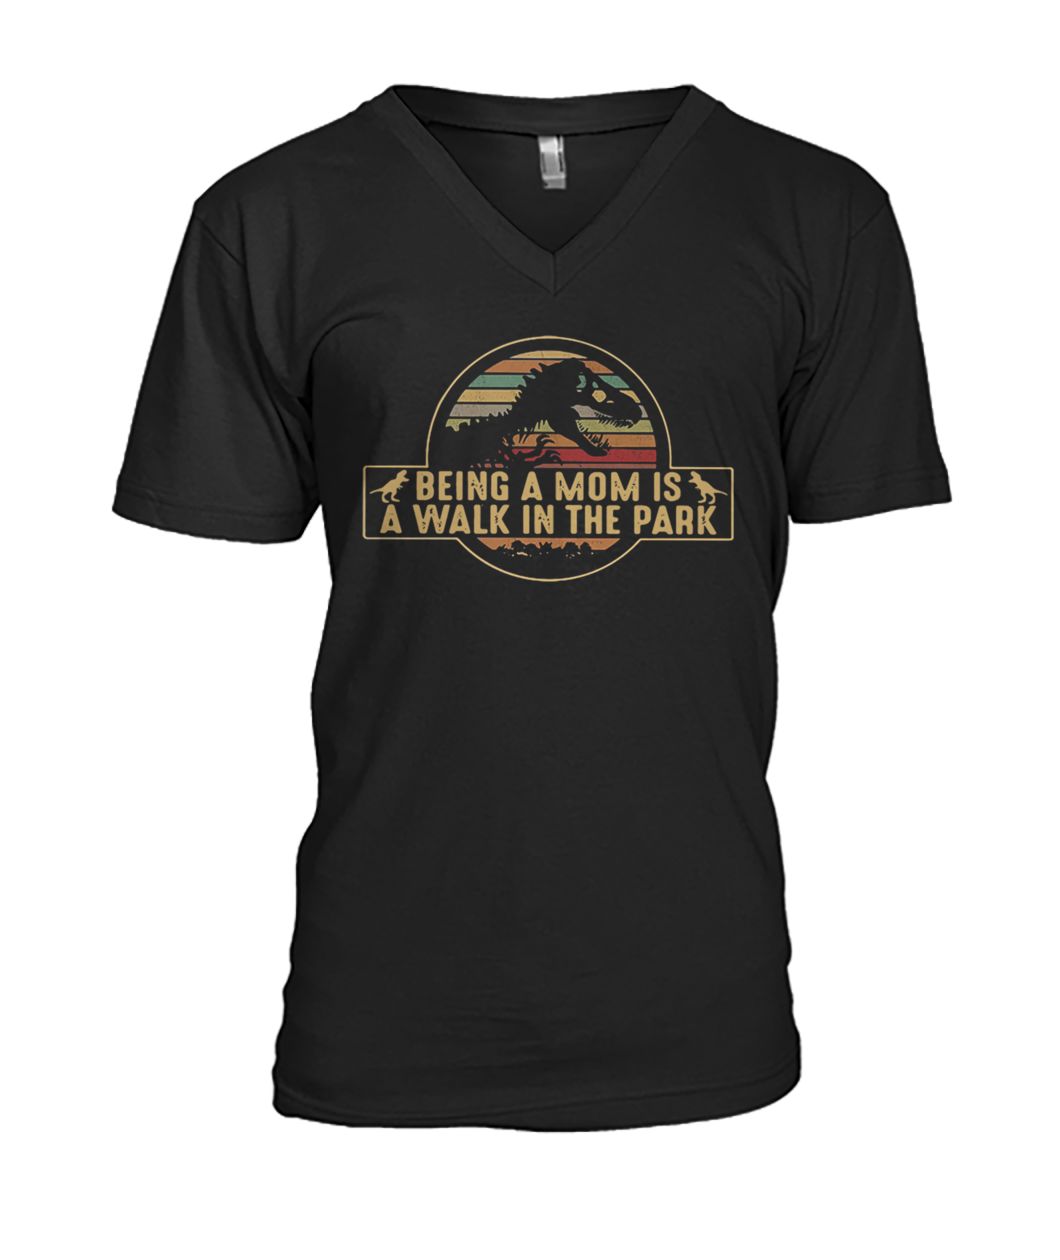 Dinosaurs being a mom is a walk in the park vintage mens v-neck